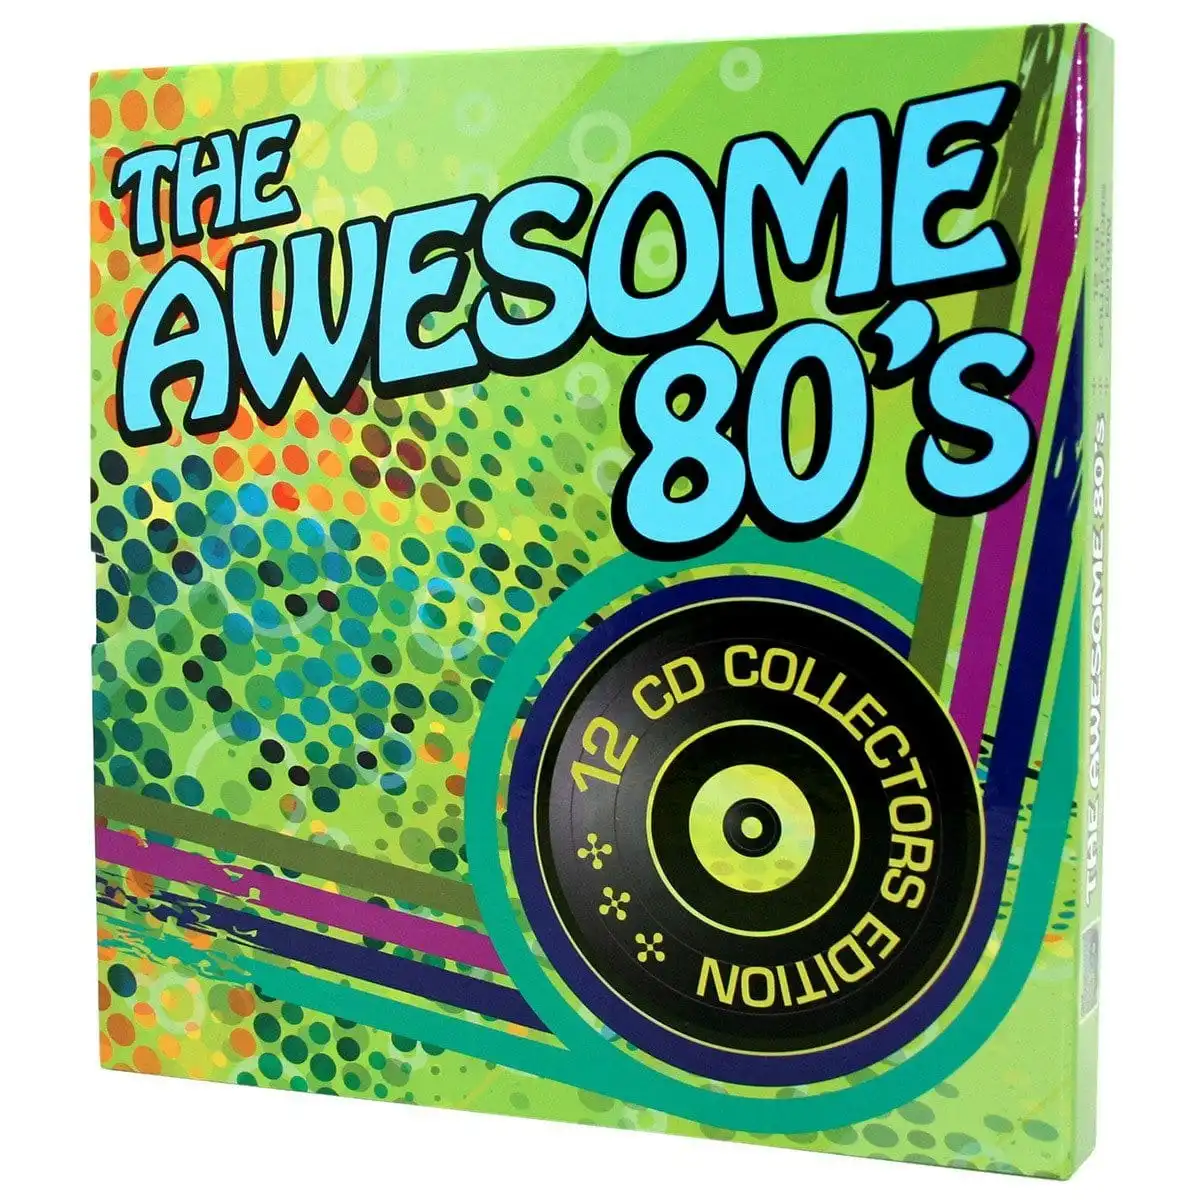 Promotional Hits Of The Decades - The Awesome 80's